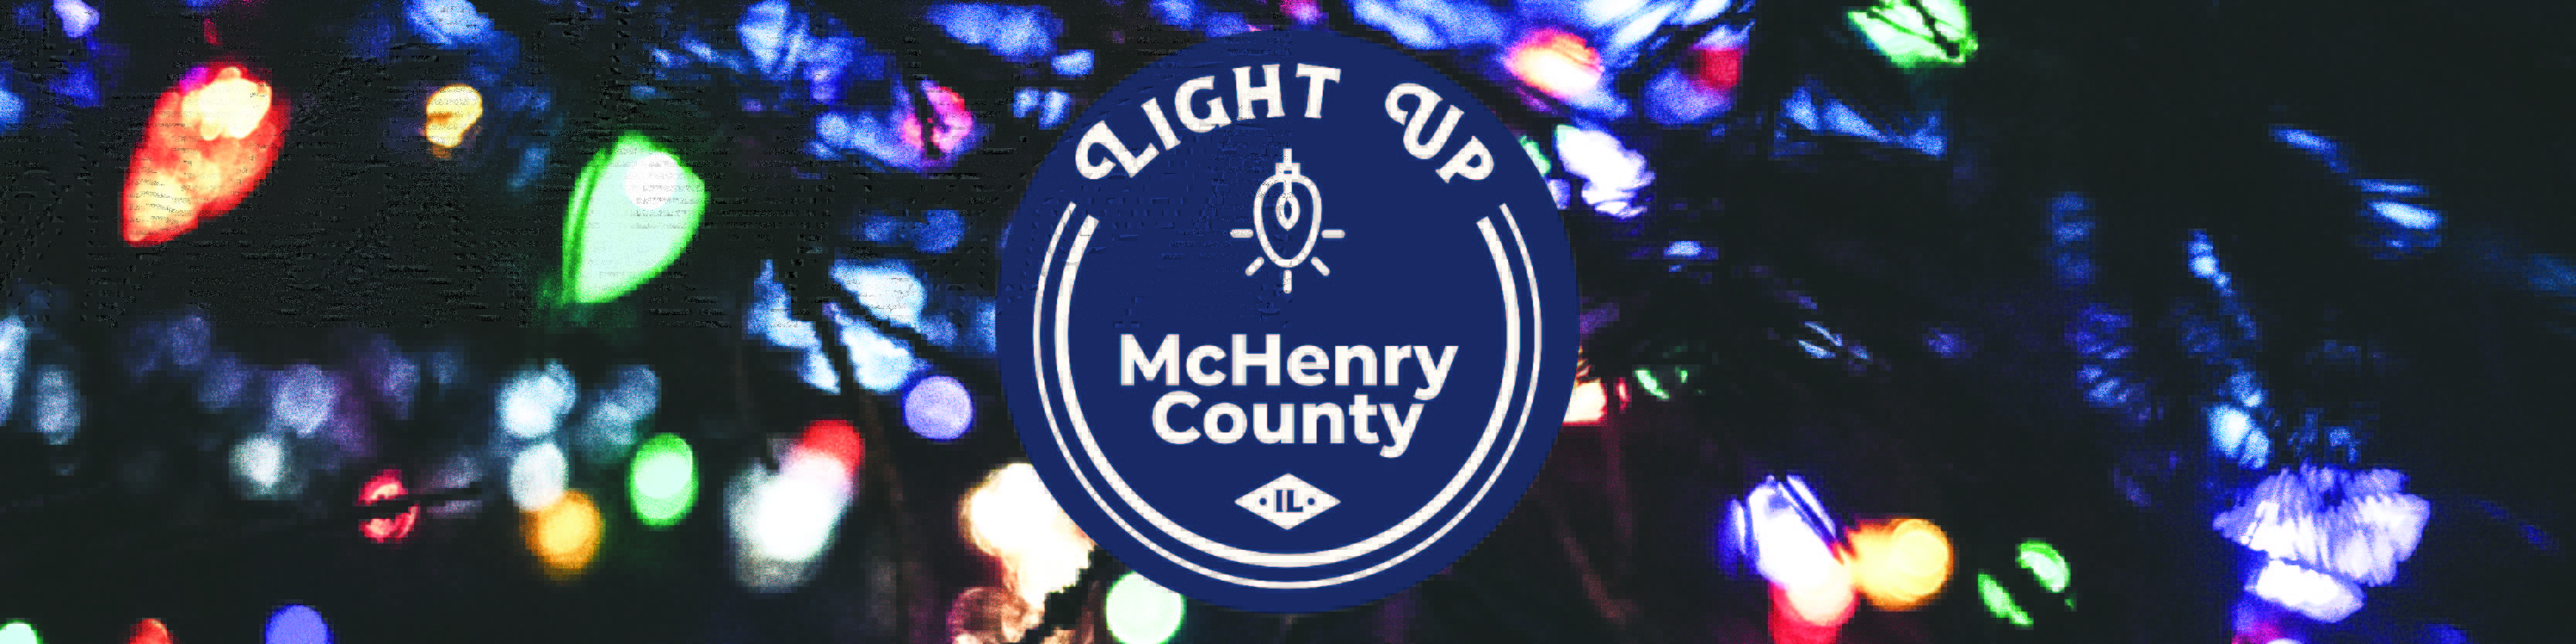 Best Holiday Light Displays in McHenry County